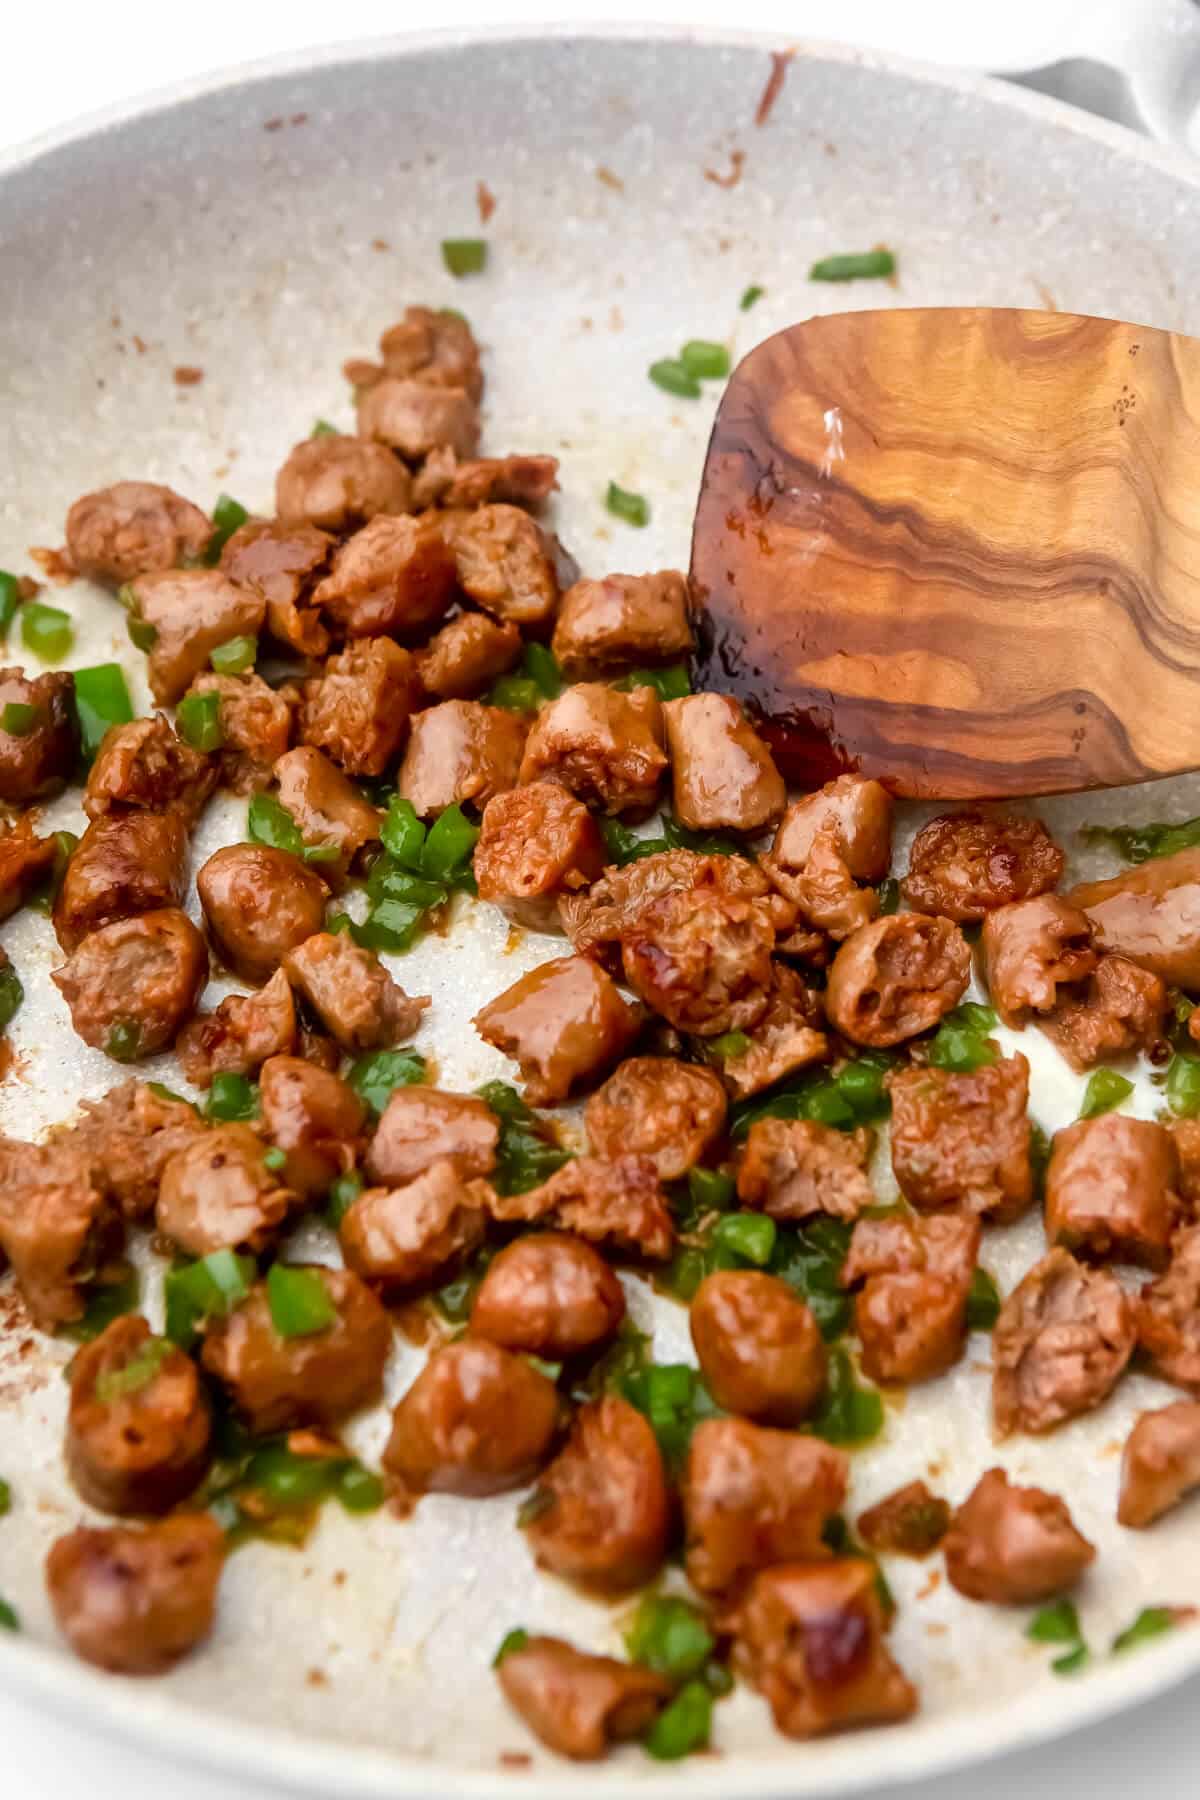 Vegan sausage and green bell pepper being cooked in a skillet.